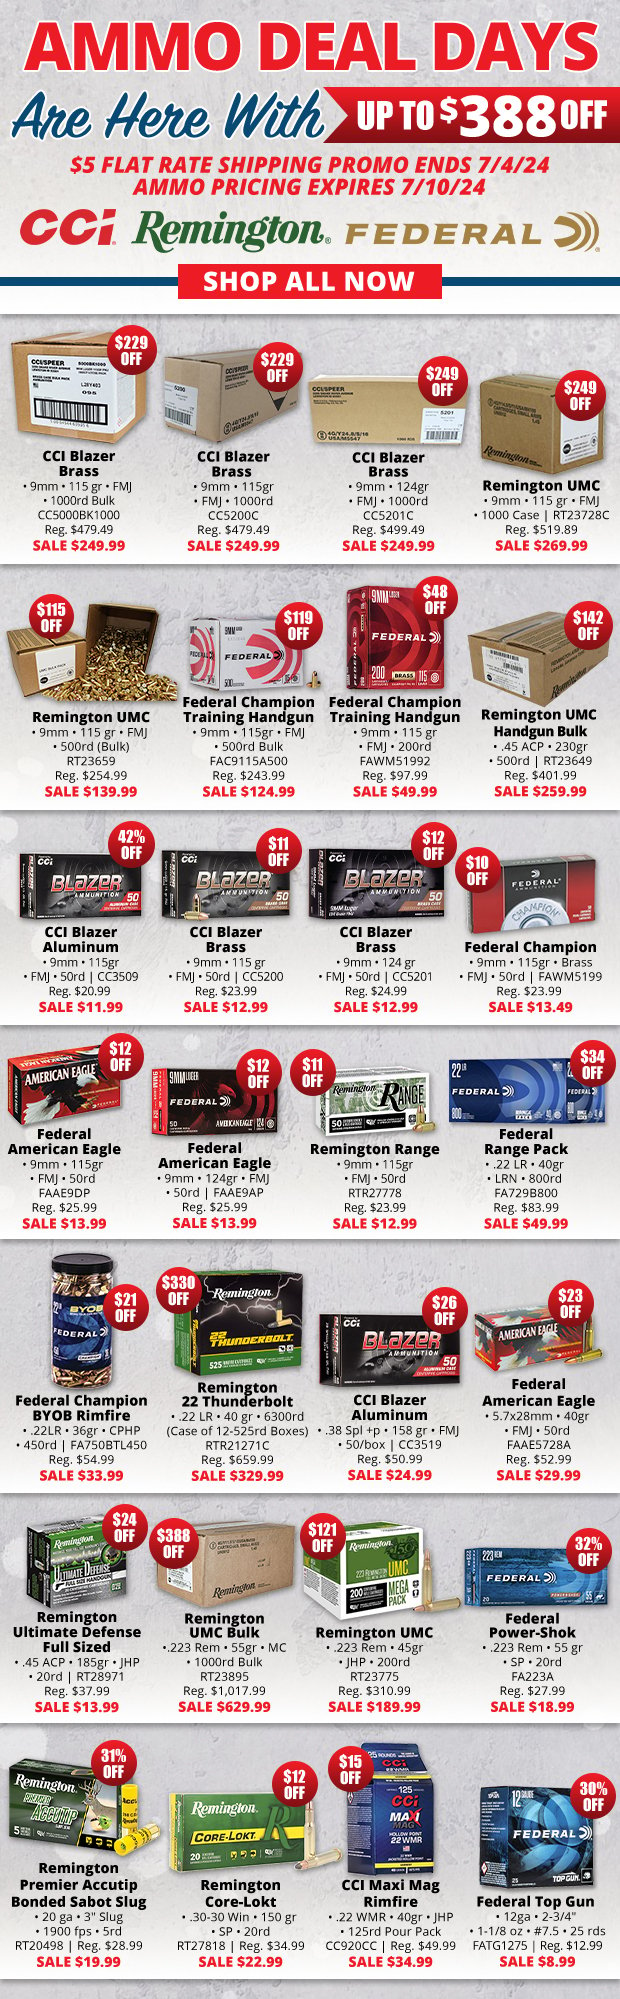 Up to $388 Off on Our Ammo Deals Days!